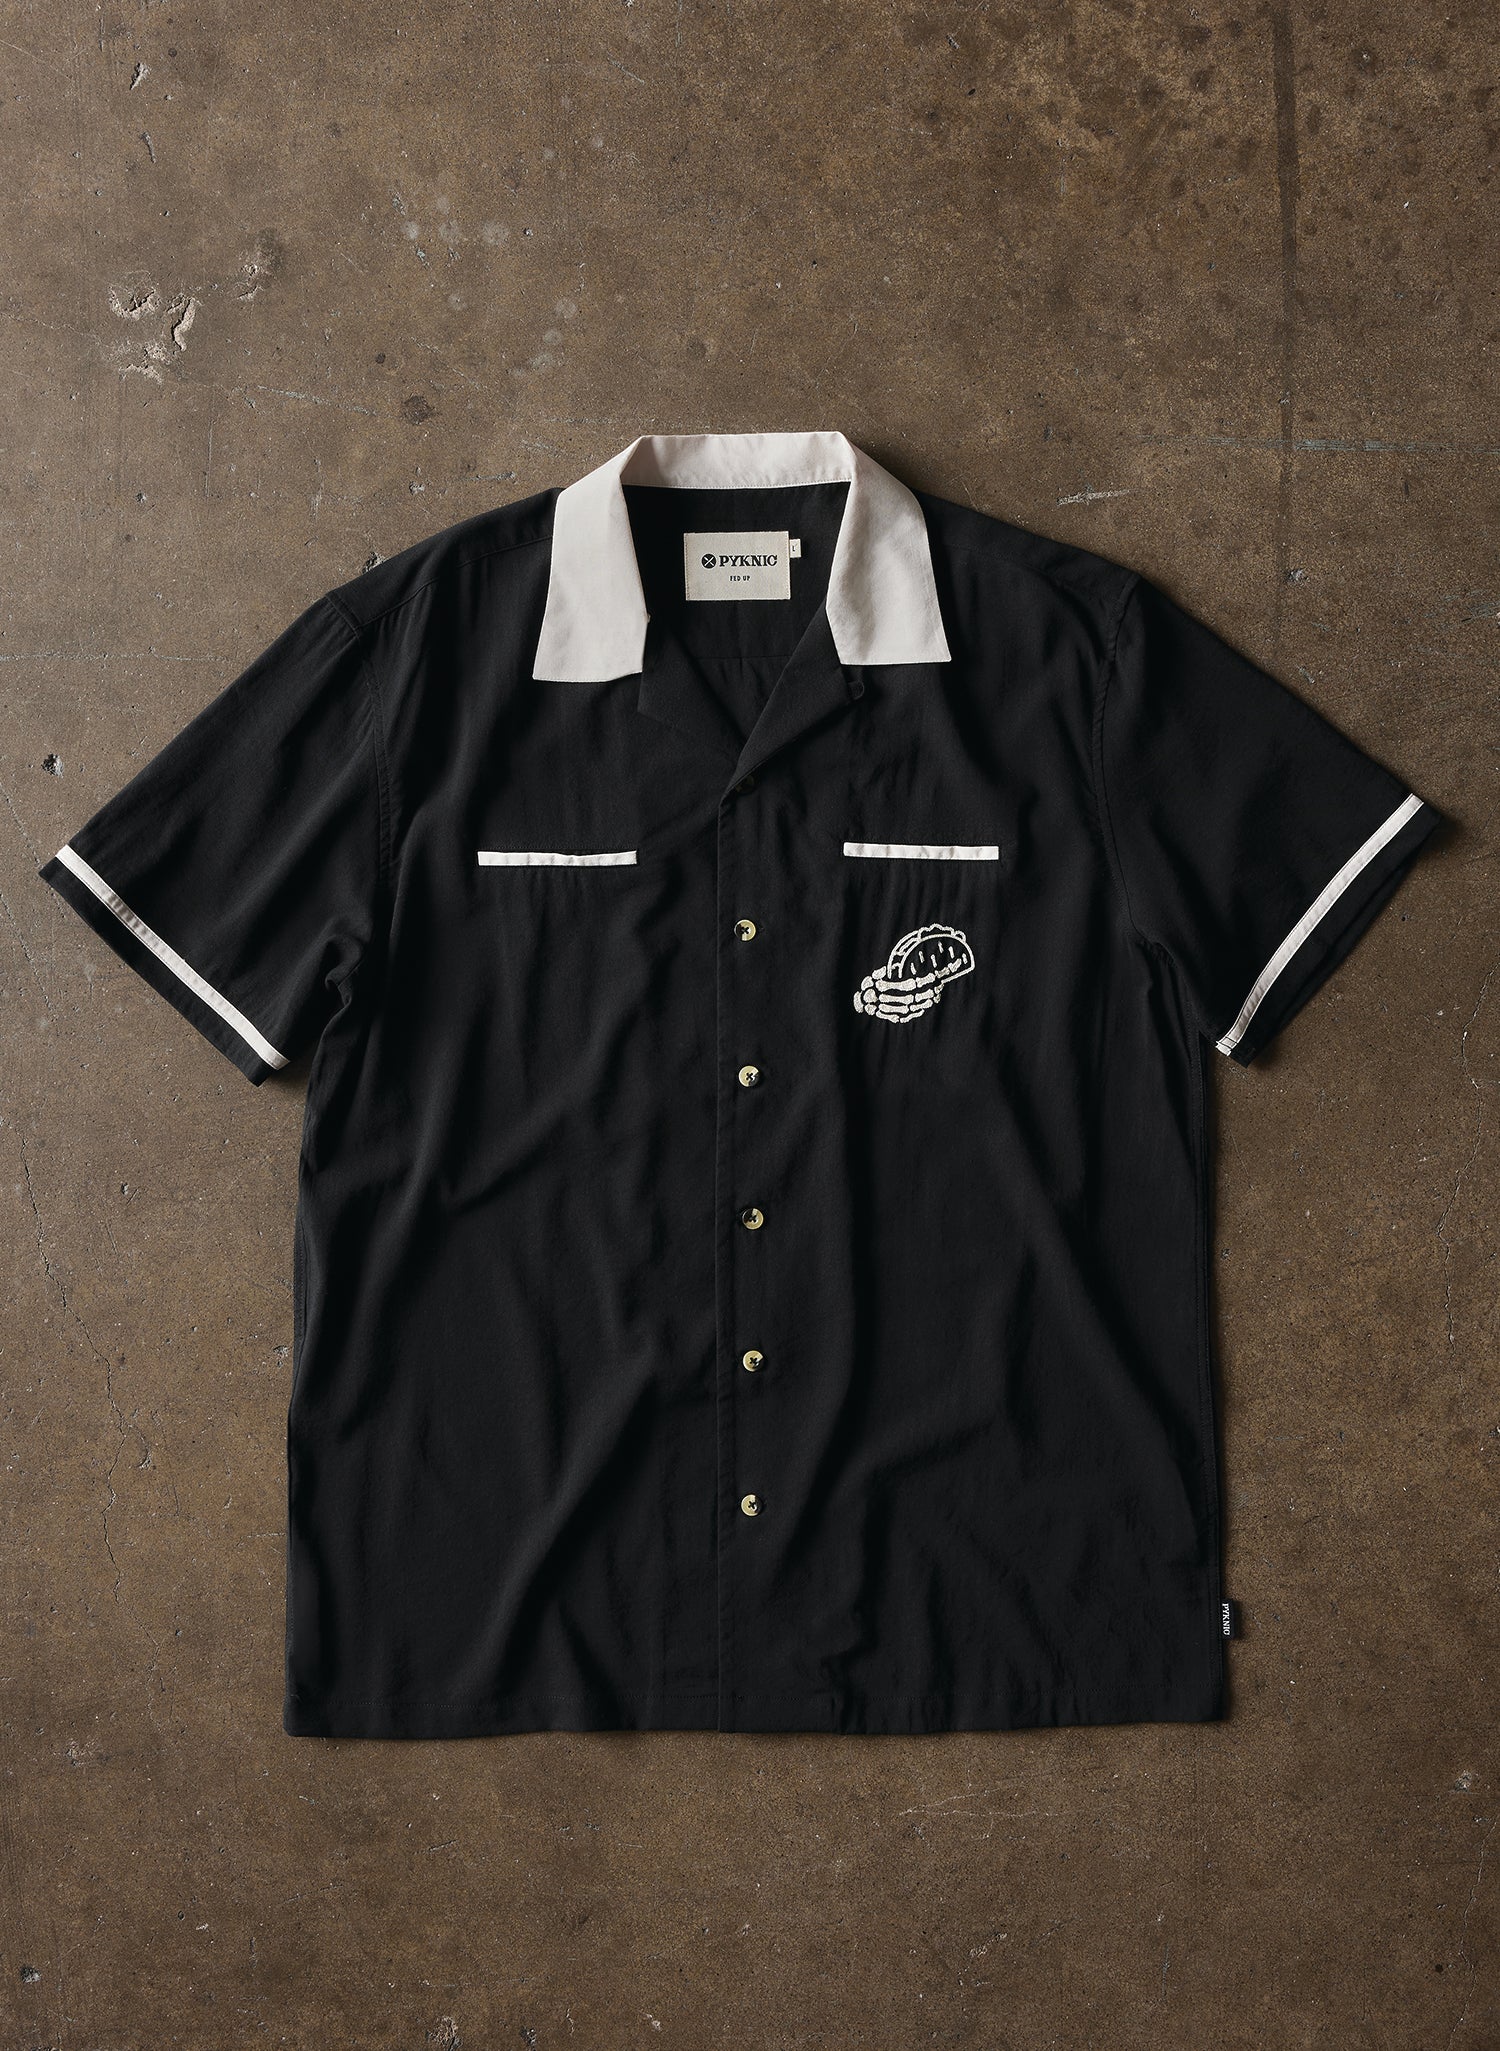 Pyknic | Black & Cream Bowling Shirt, Vacation Casual Button-Up Shirt | Button Down Shirt with Chainstitch Embroidery, Skeleton Hand Chain Stitch Taco Embroidery, Tacos & Beer Embroidered Shirt, Taco Lover Shirt, Best Foodie Shirt, Best Foodie Gift, Food Themed Apparel, Taco Shirt, Food Tattoo Flash, Alternative Lifestyle Brand, Motorcycle Lifestyle Brand